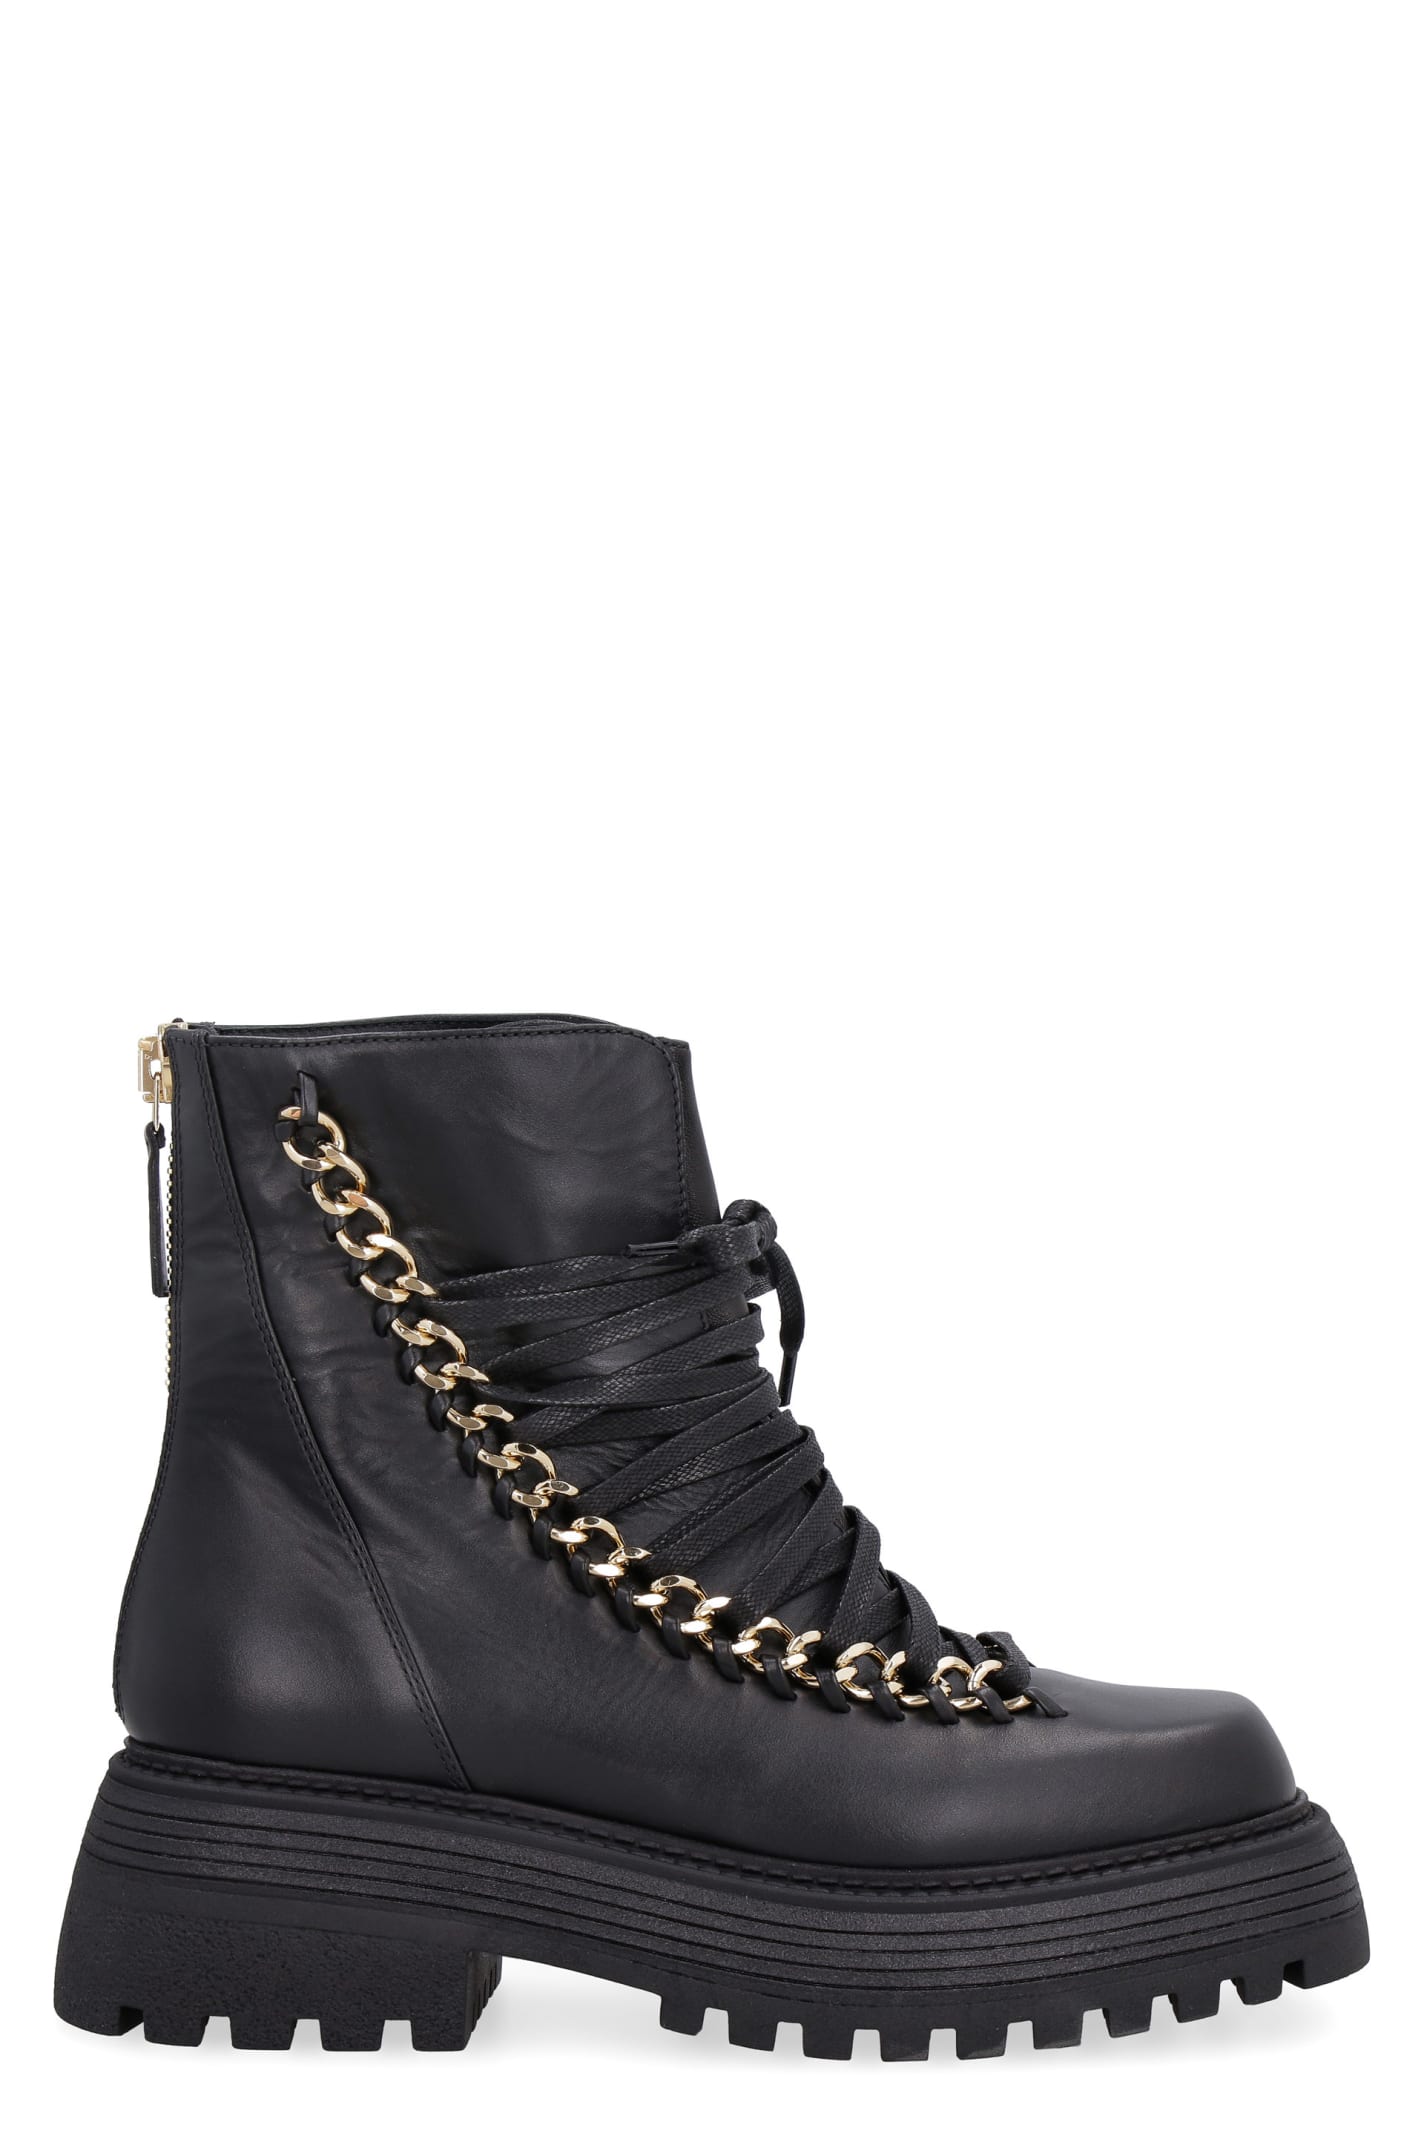 Alevì Ines Leather Ankle Boots